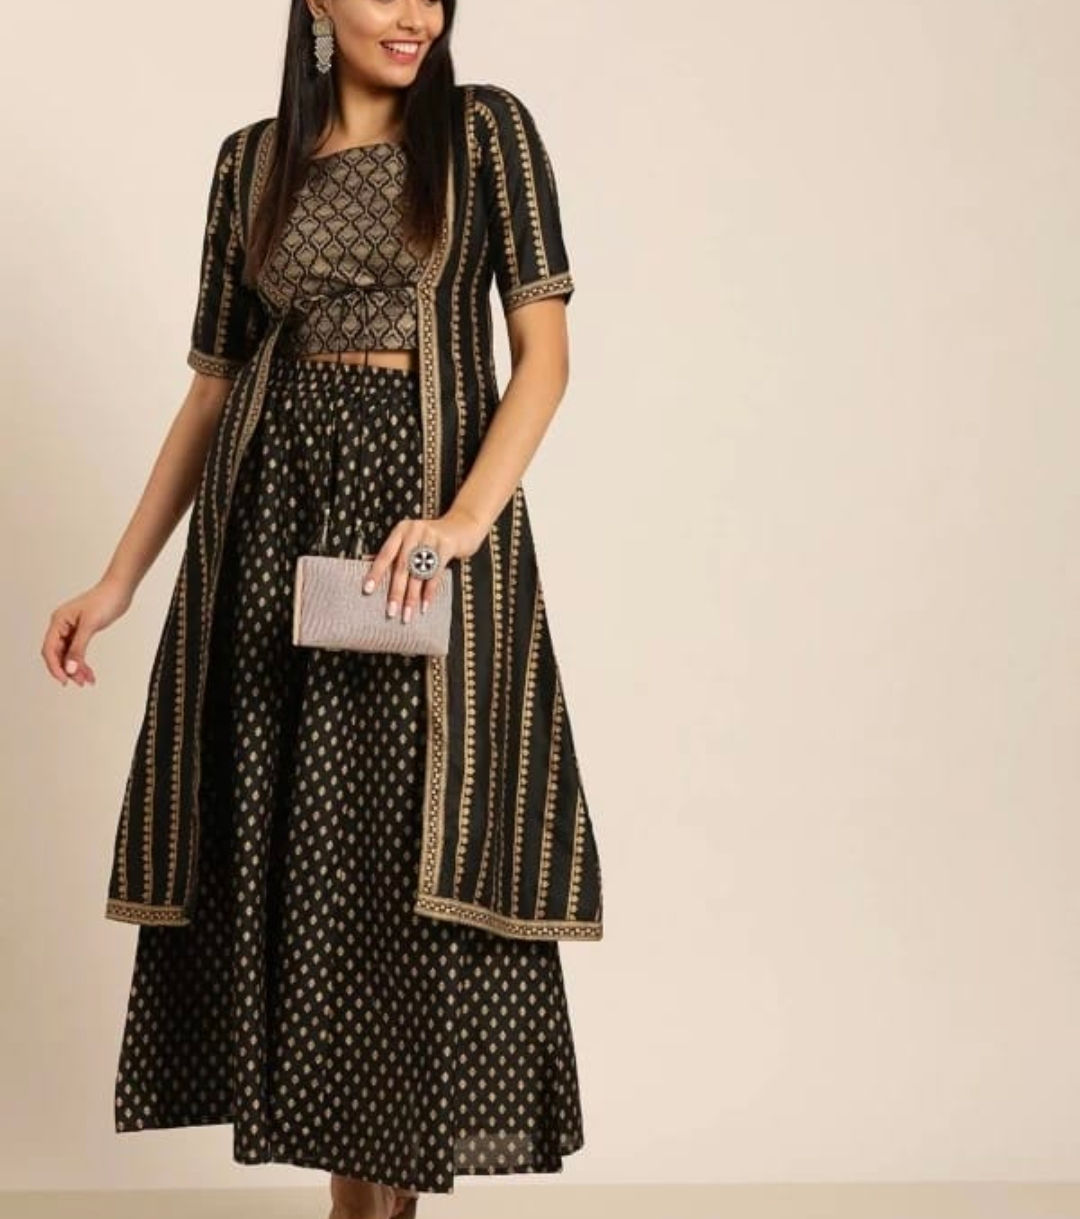 Dharma Fashion Women Ethnic Jacket, Top and Skirt Set - Buy Dharma Fashion Women Ethnic Jacket, Top and Skirt Set Online at Best Prices in India | Flipkart.com